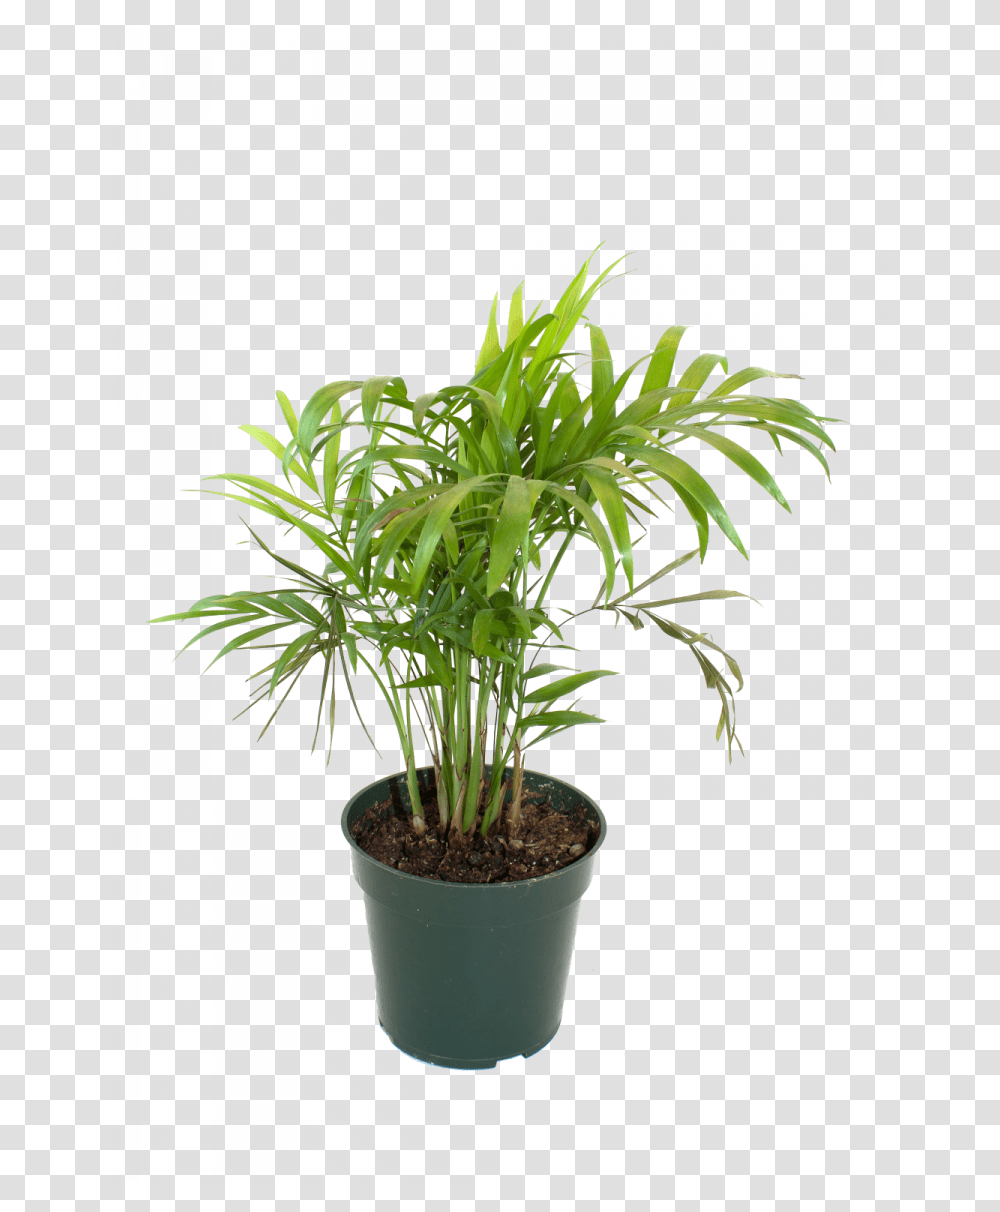 Bamboo House Plant Inspiring Flowerpot Bamboo Houseplant Bamboo In Pot Hd, Palm Tree, Arecaceae, Leaf Transparent Png